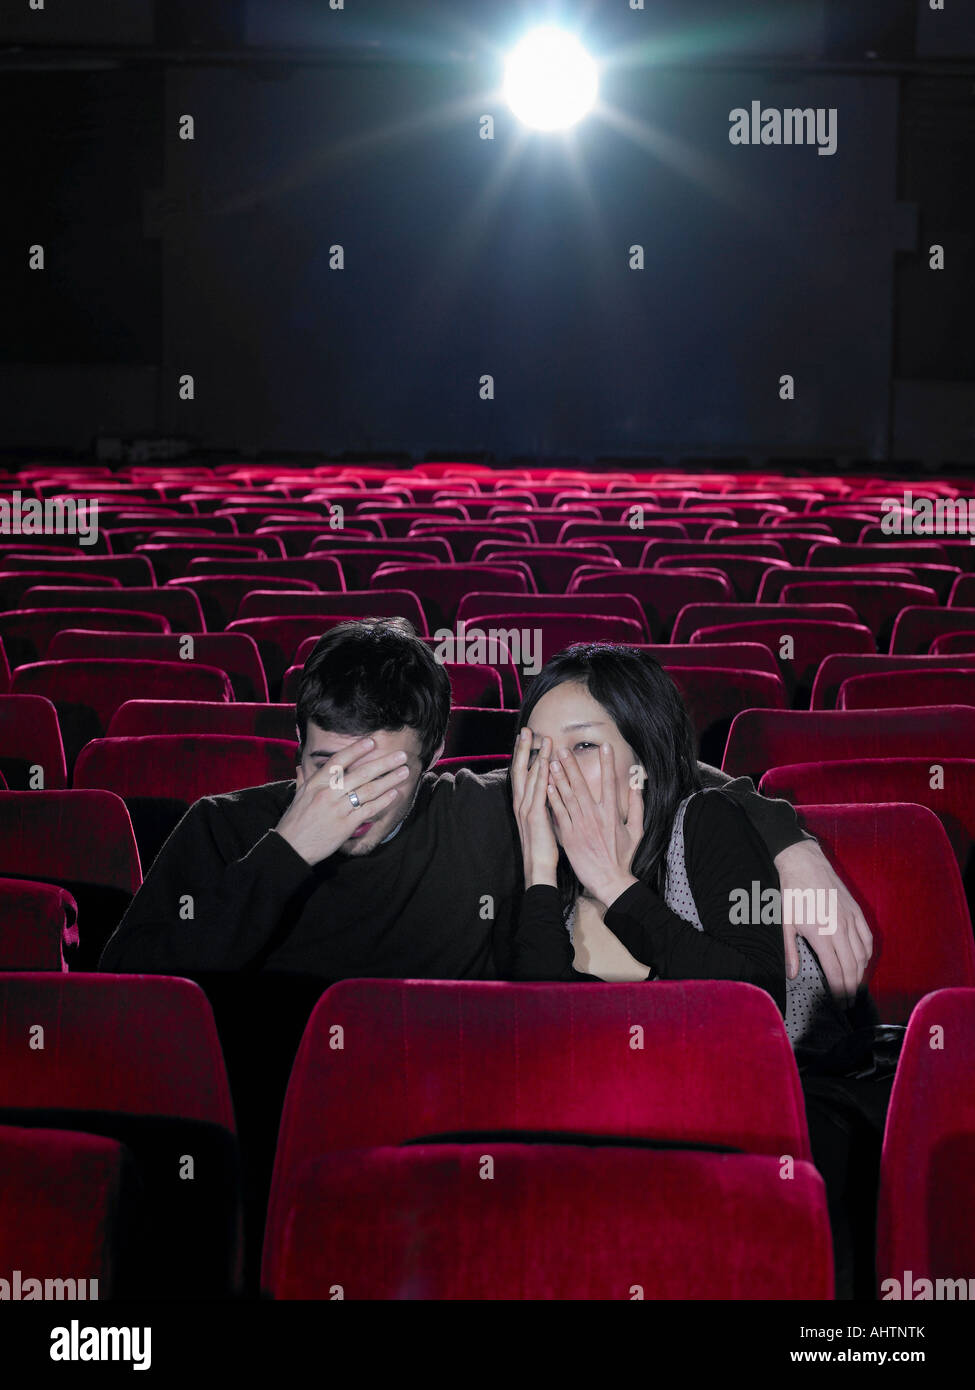 Young couple sitting in cinema holding hands over faces Stock Photo